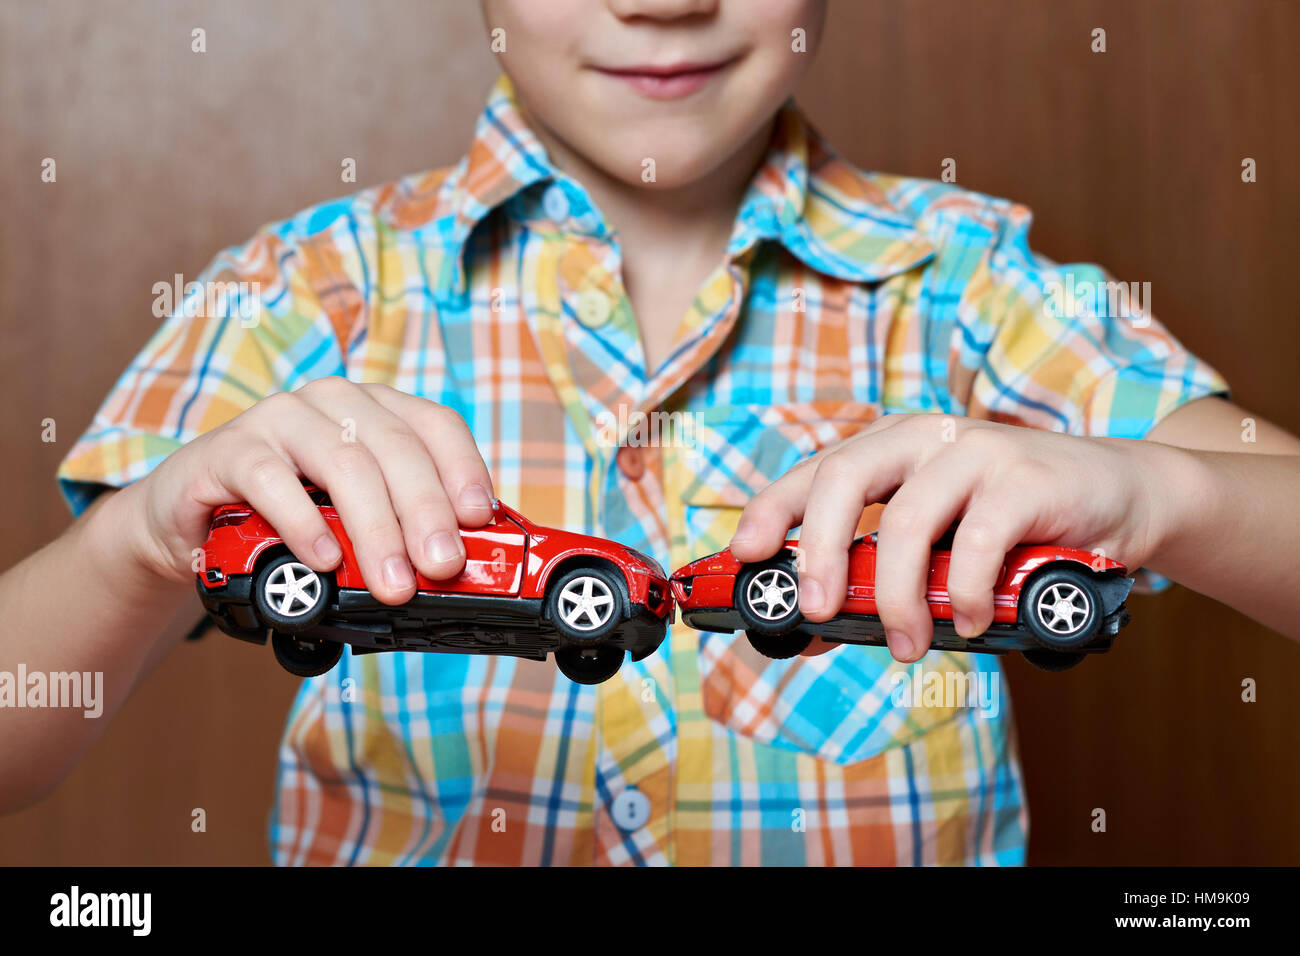 Boy playing with toy cars on wooden floor Stock Photo